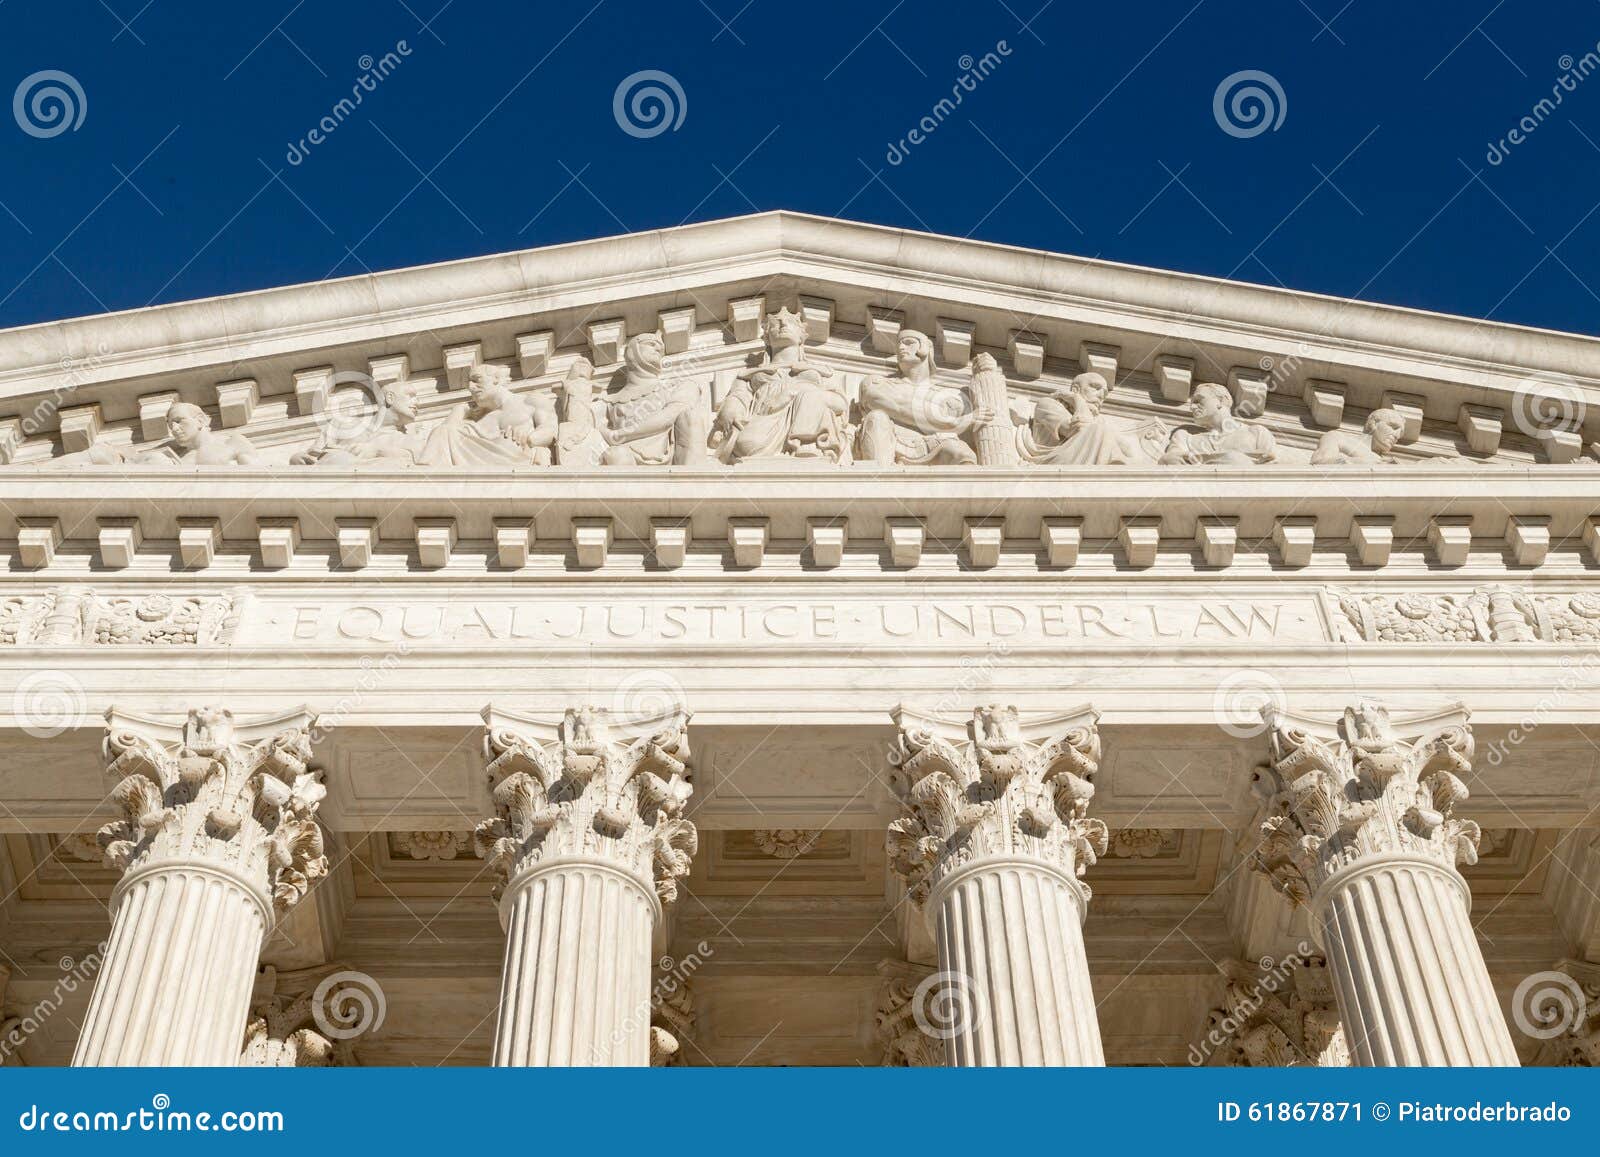 equal justice under law (text at the front of supreme court of u.s.)